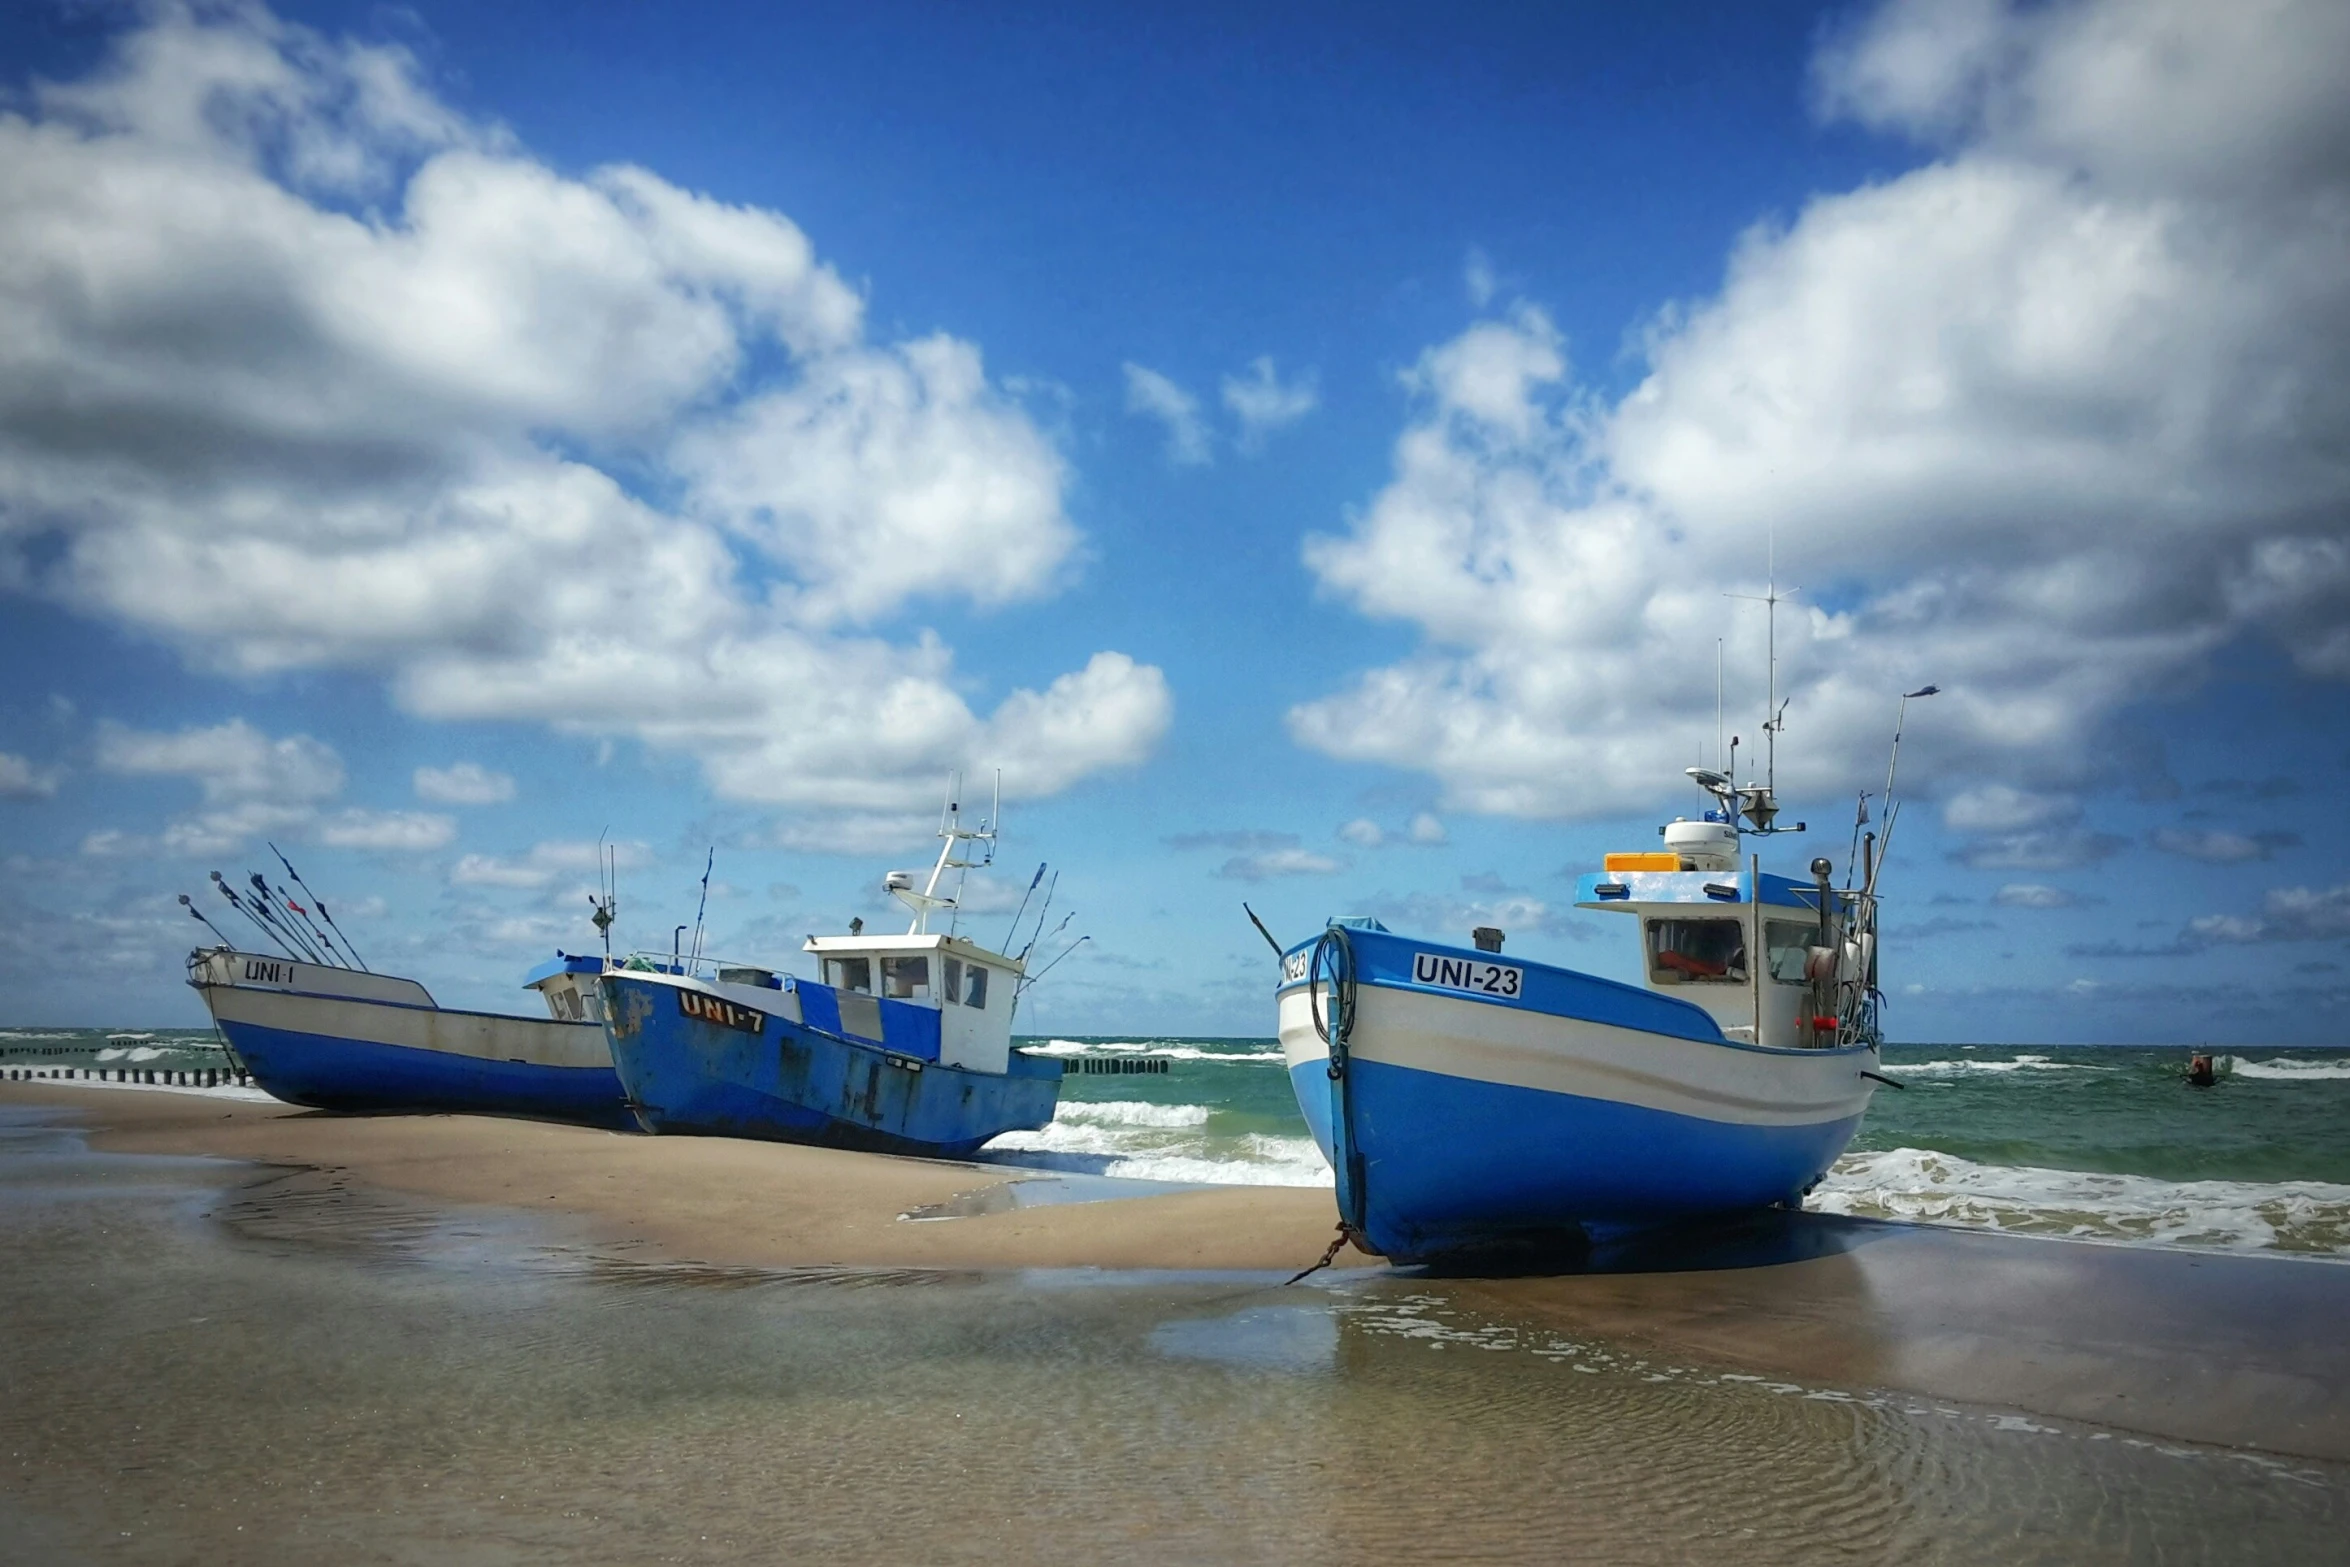 two small boats are sitting in the sand